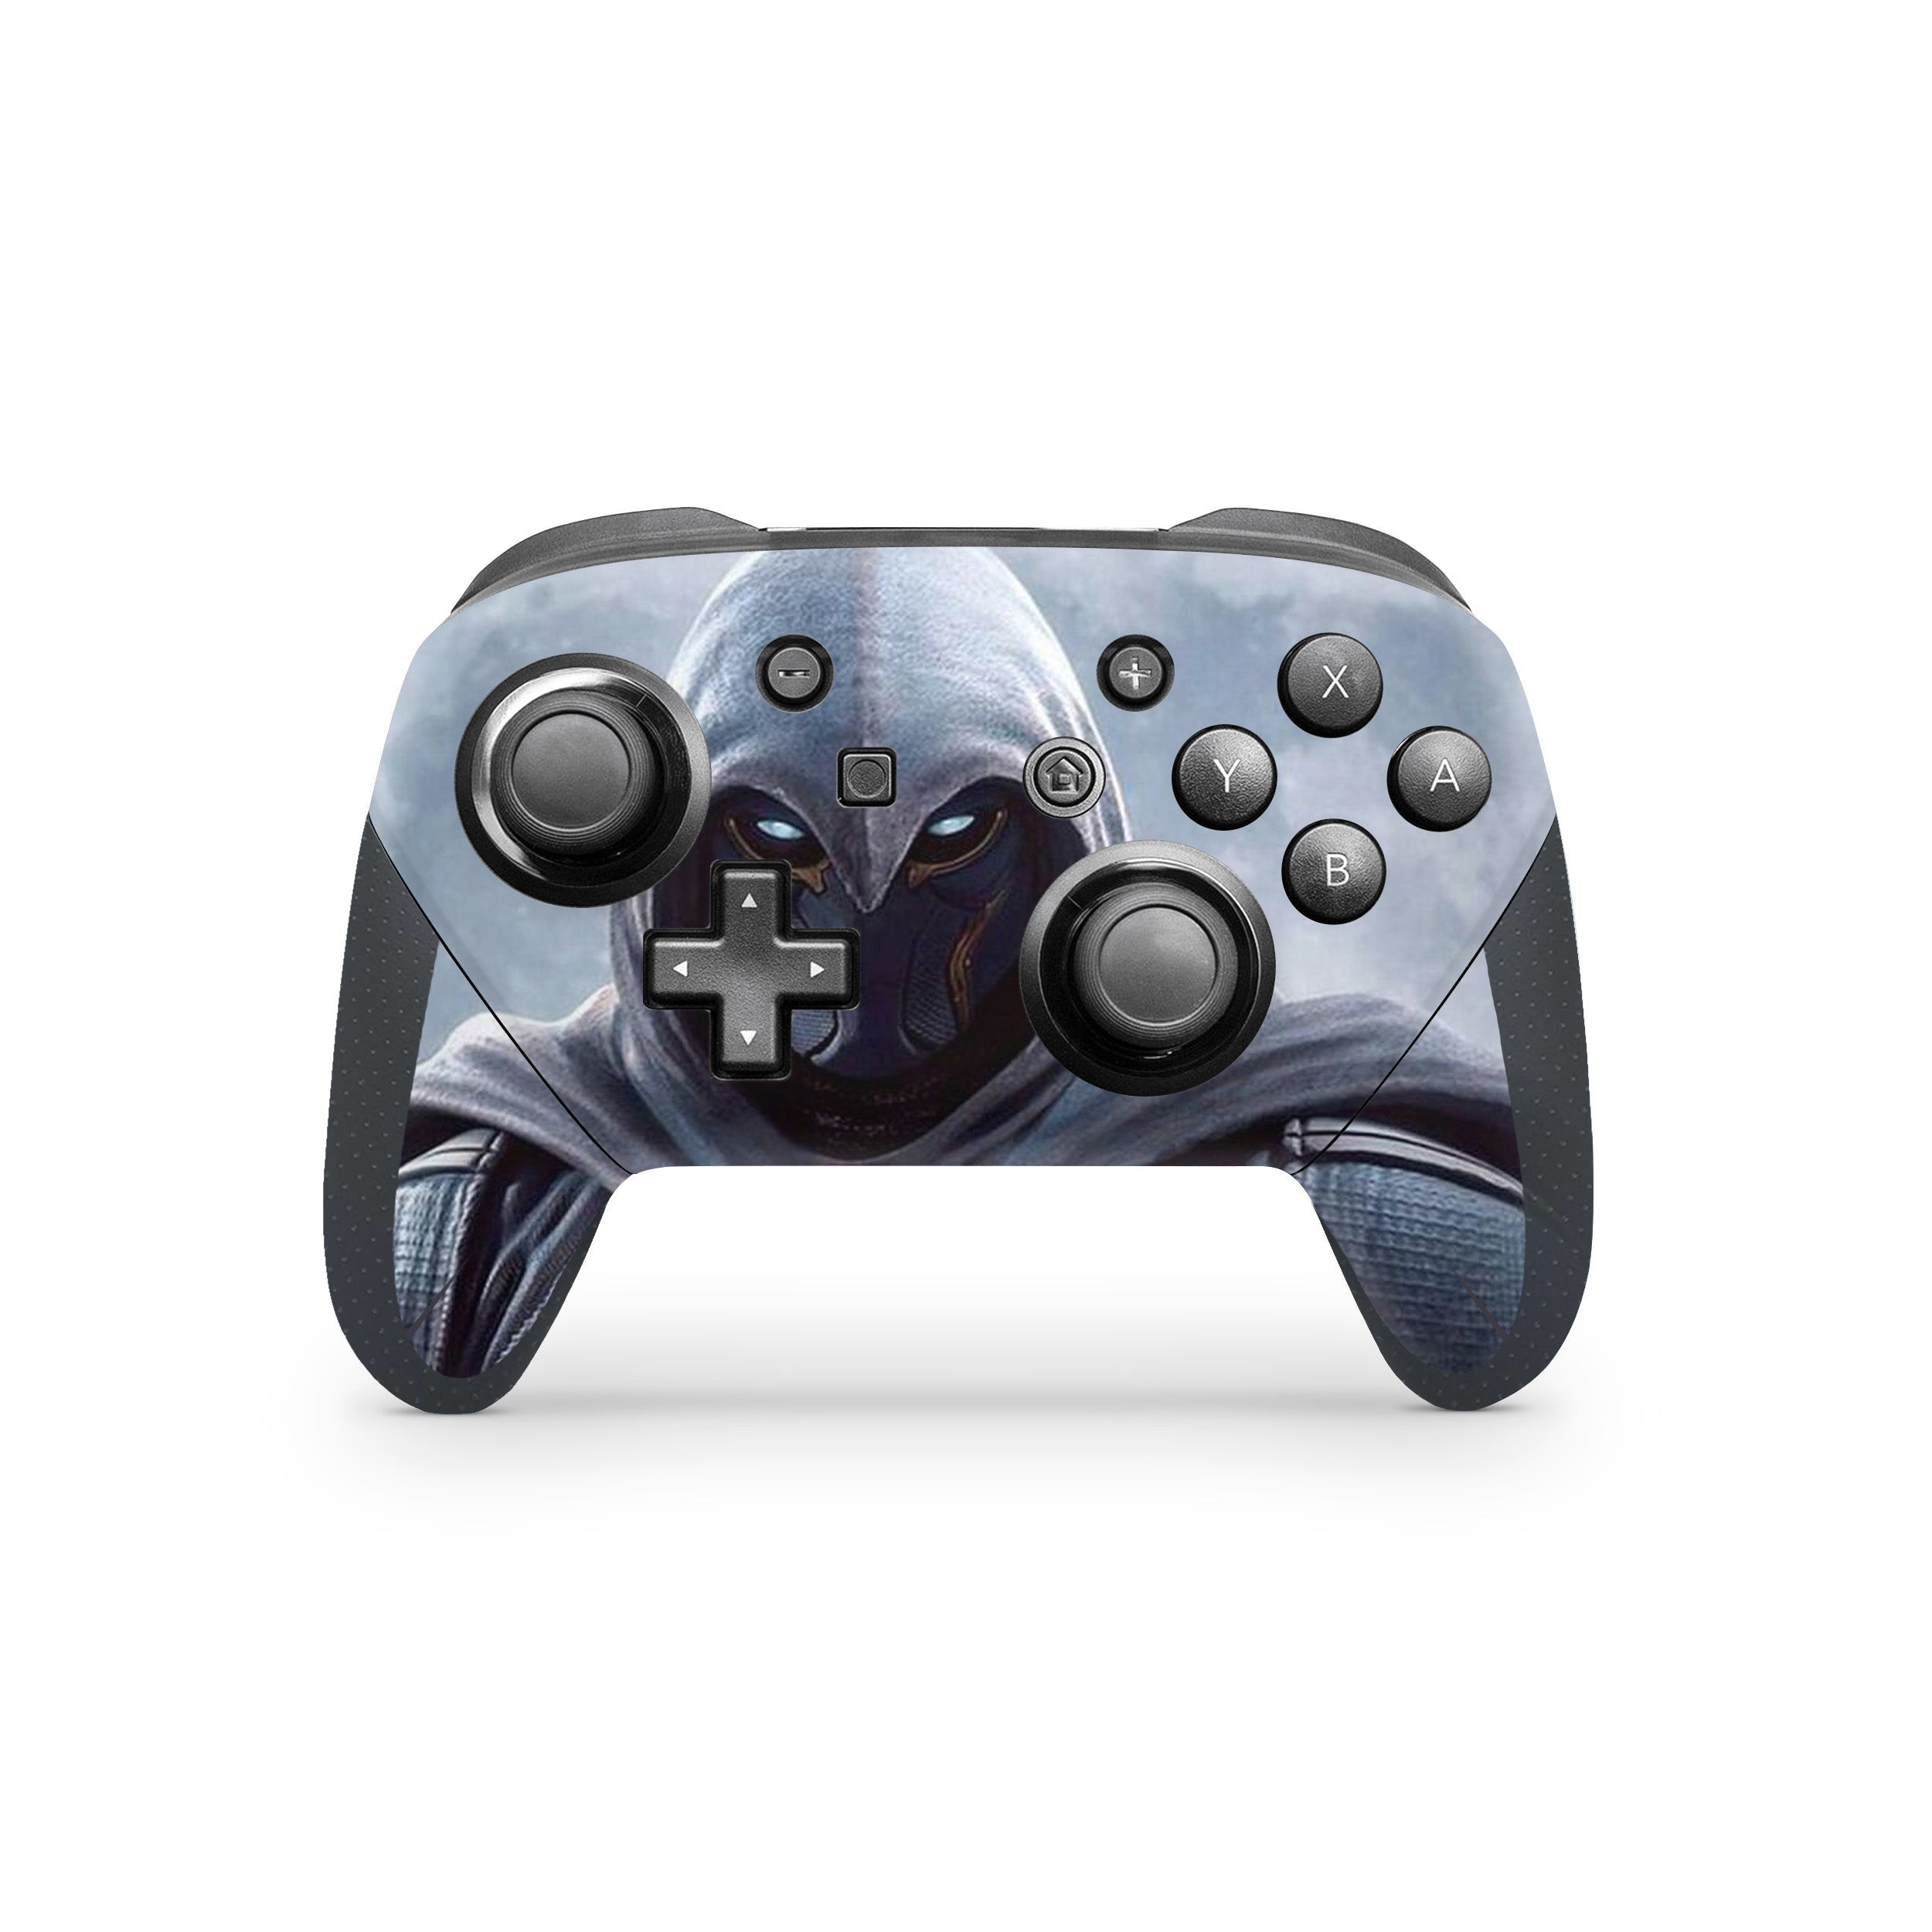 A video game skin featuring a Marvel Comics Moon Knight design for the Switch Pro Controller.